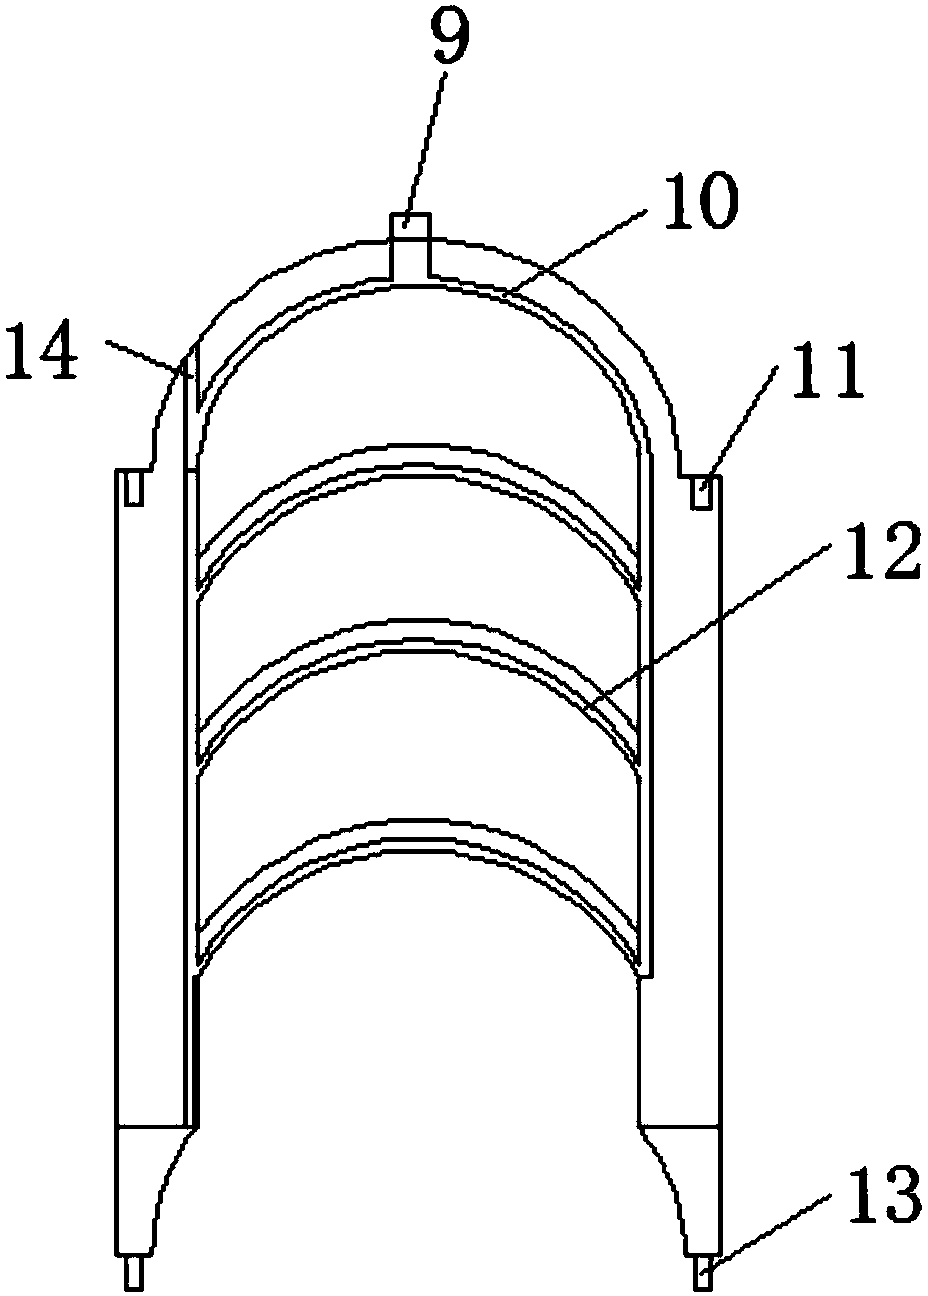 Arched slope device for preventing water and soil loss